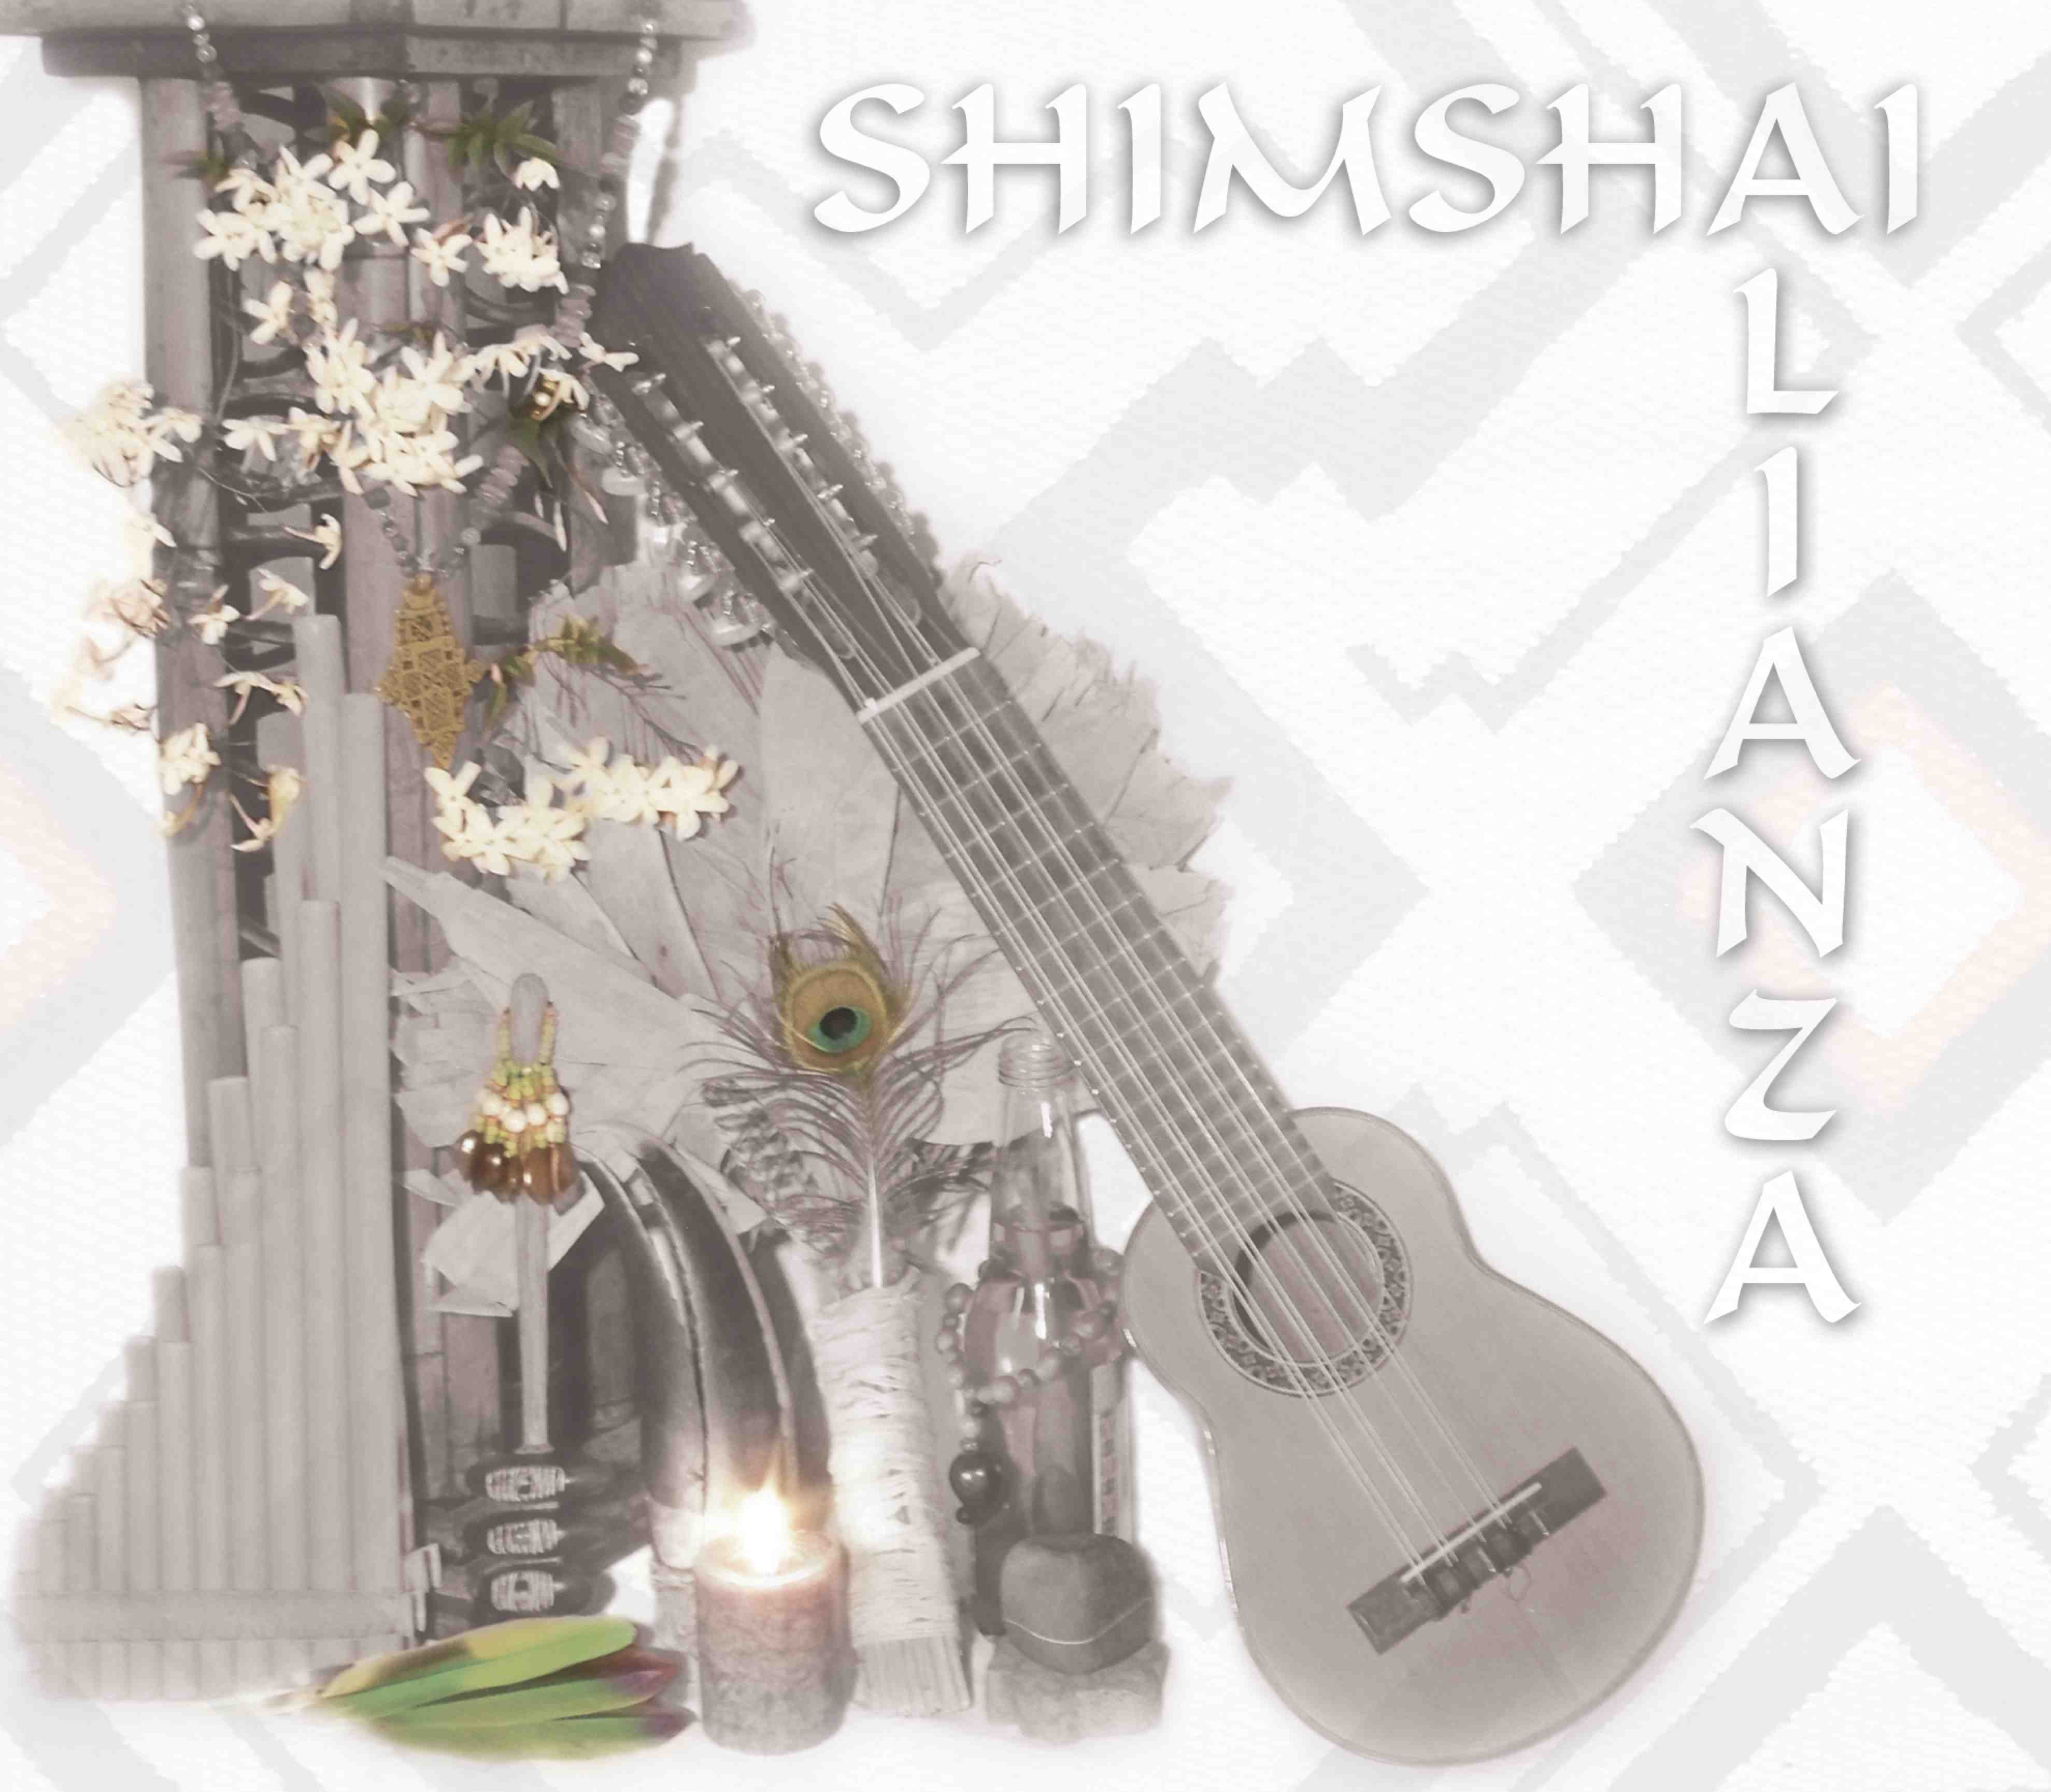 Minha Mae Oxumare traditional Brazilian song to the spirit of the waters from the album Alianza by Shimshai, spiritual world folk fusion